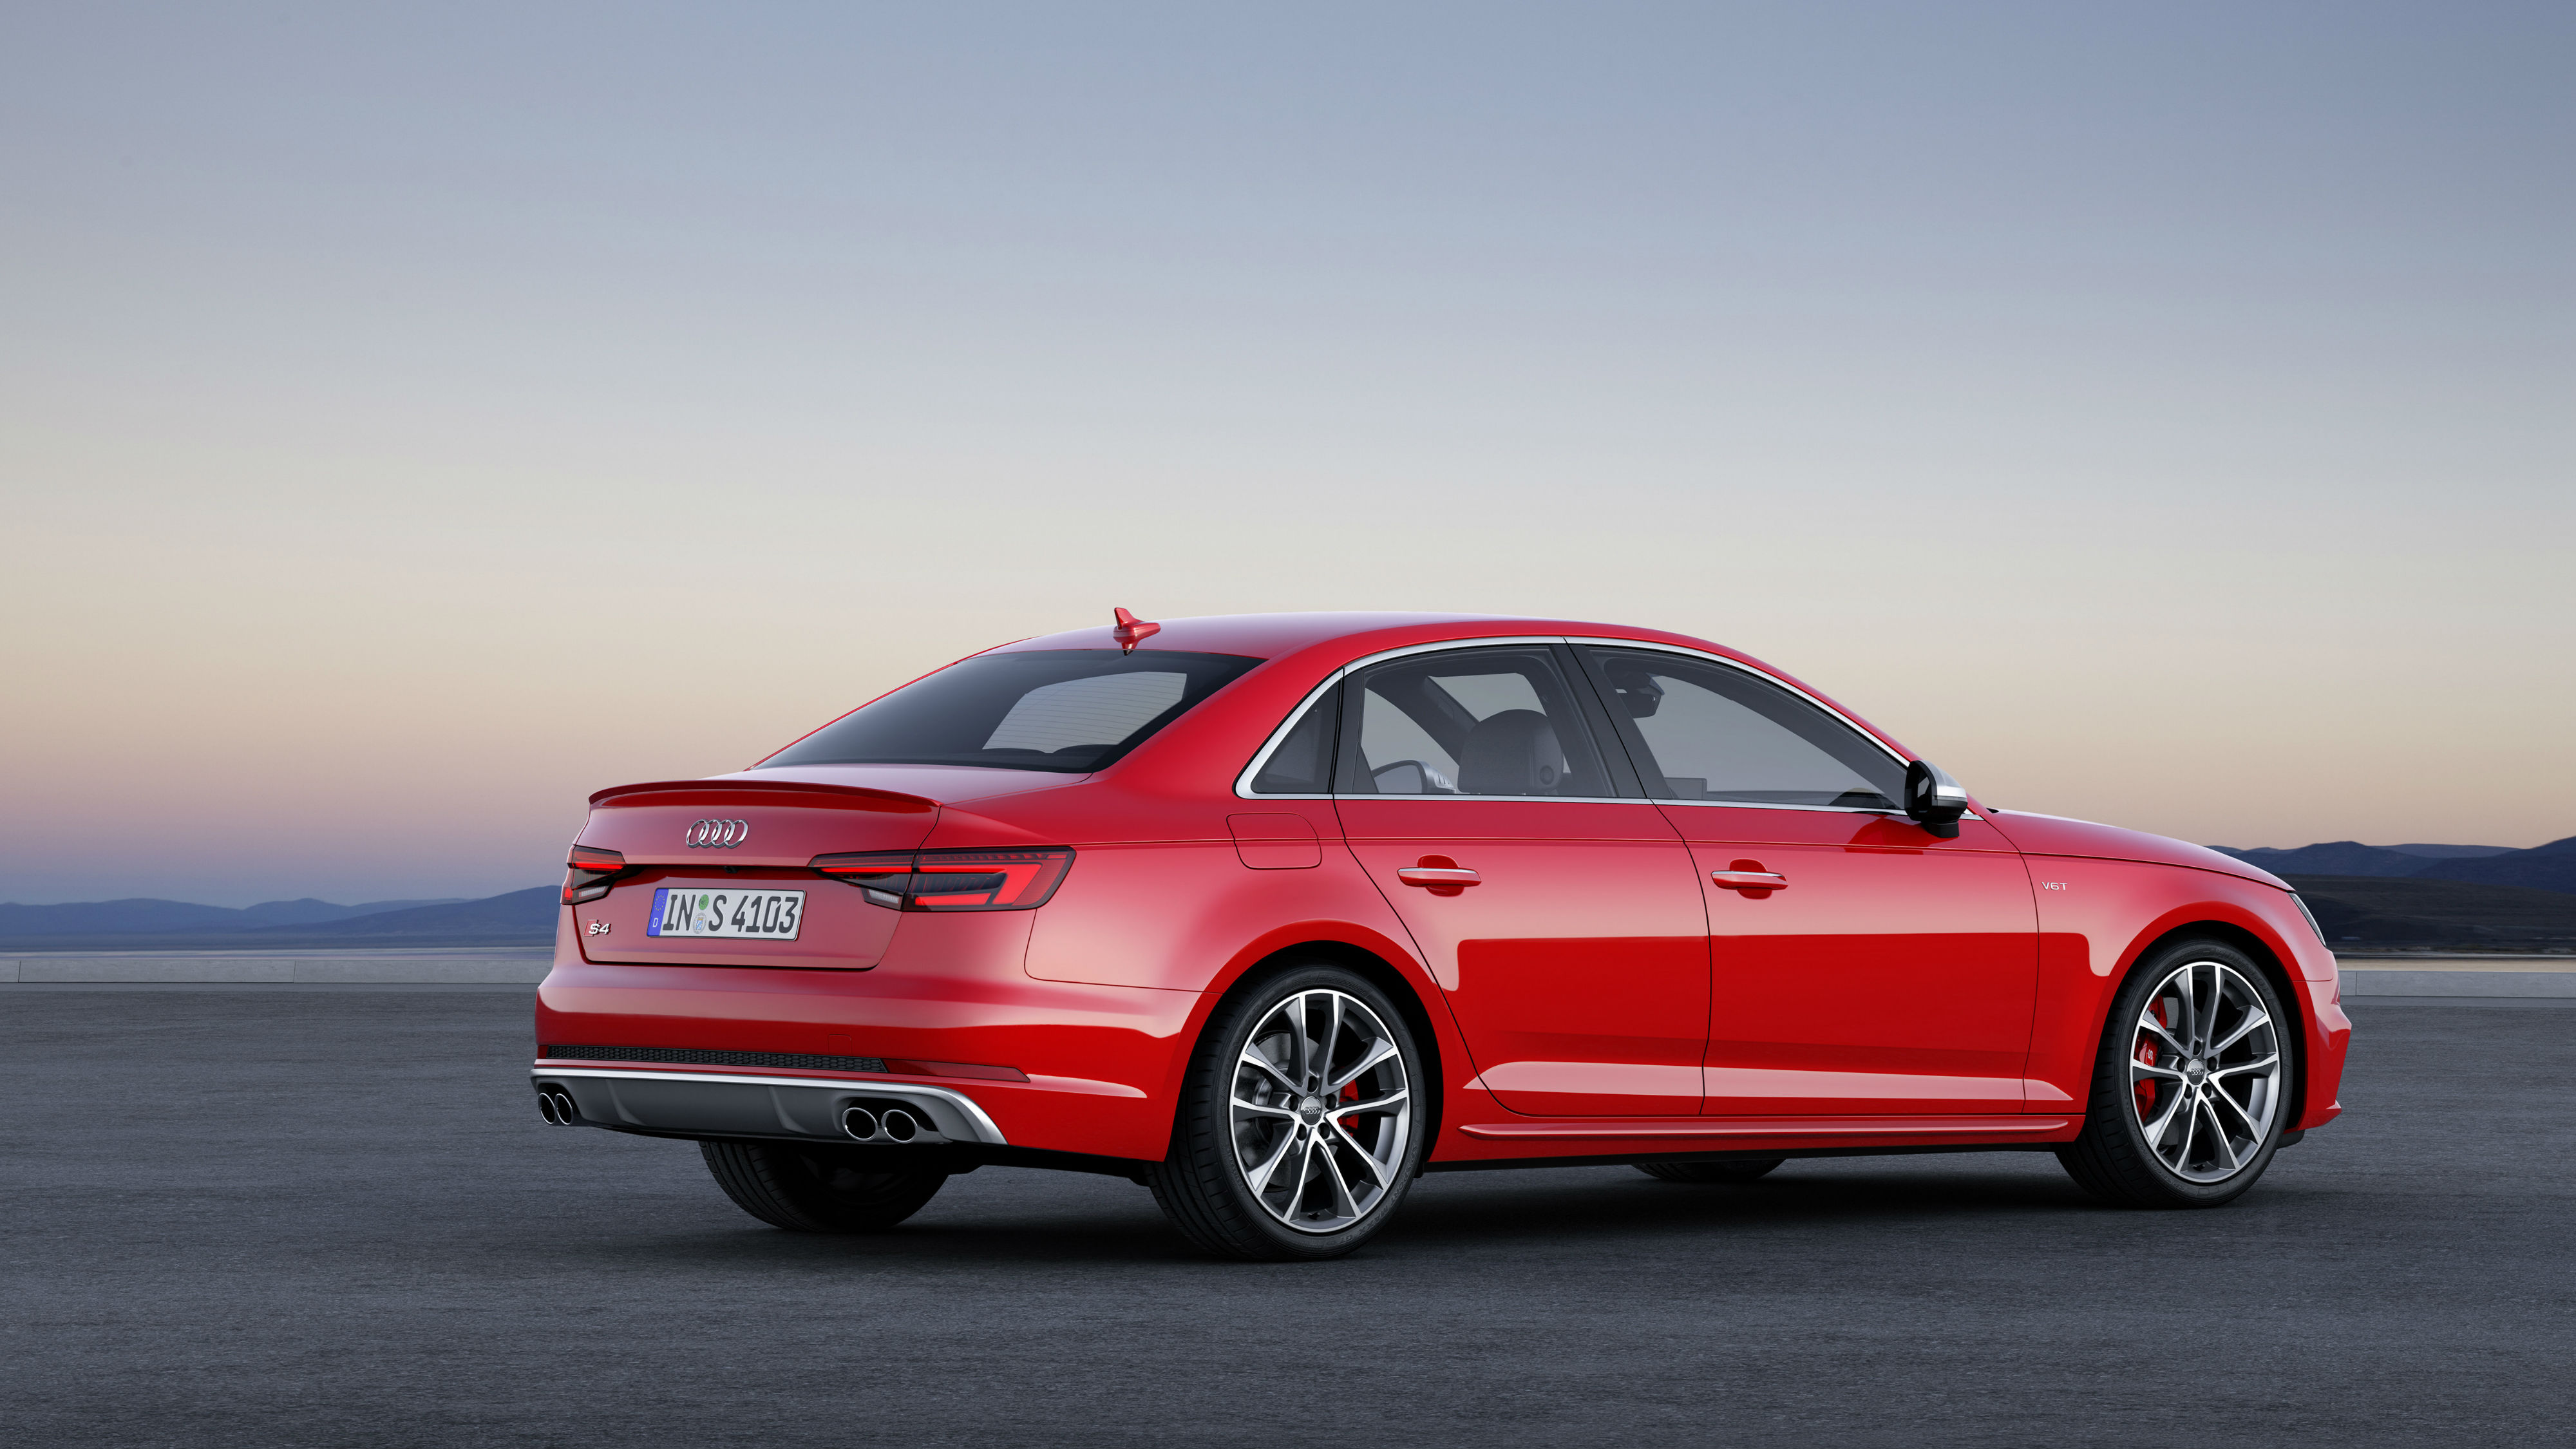 The 2015 Audi S4 sports saloon and estate models feature a 349bhp turbocharged V6 engine